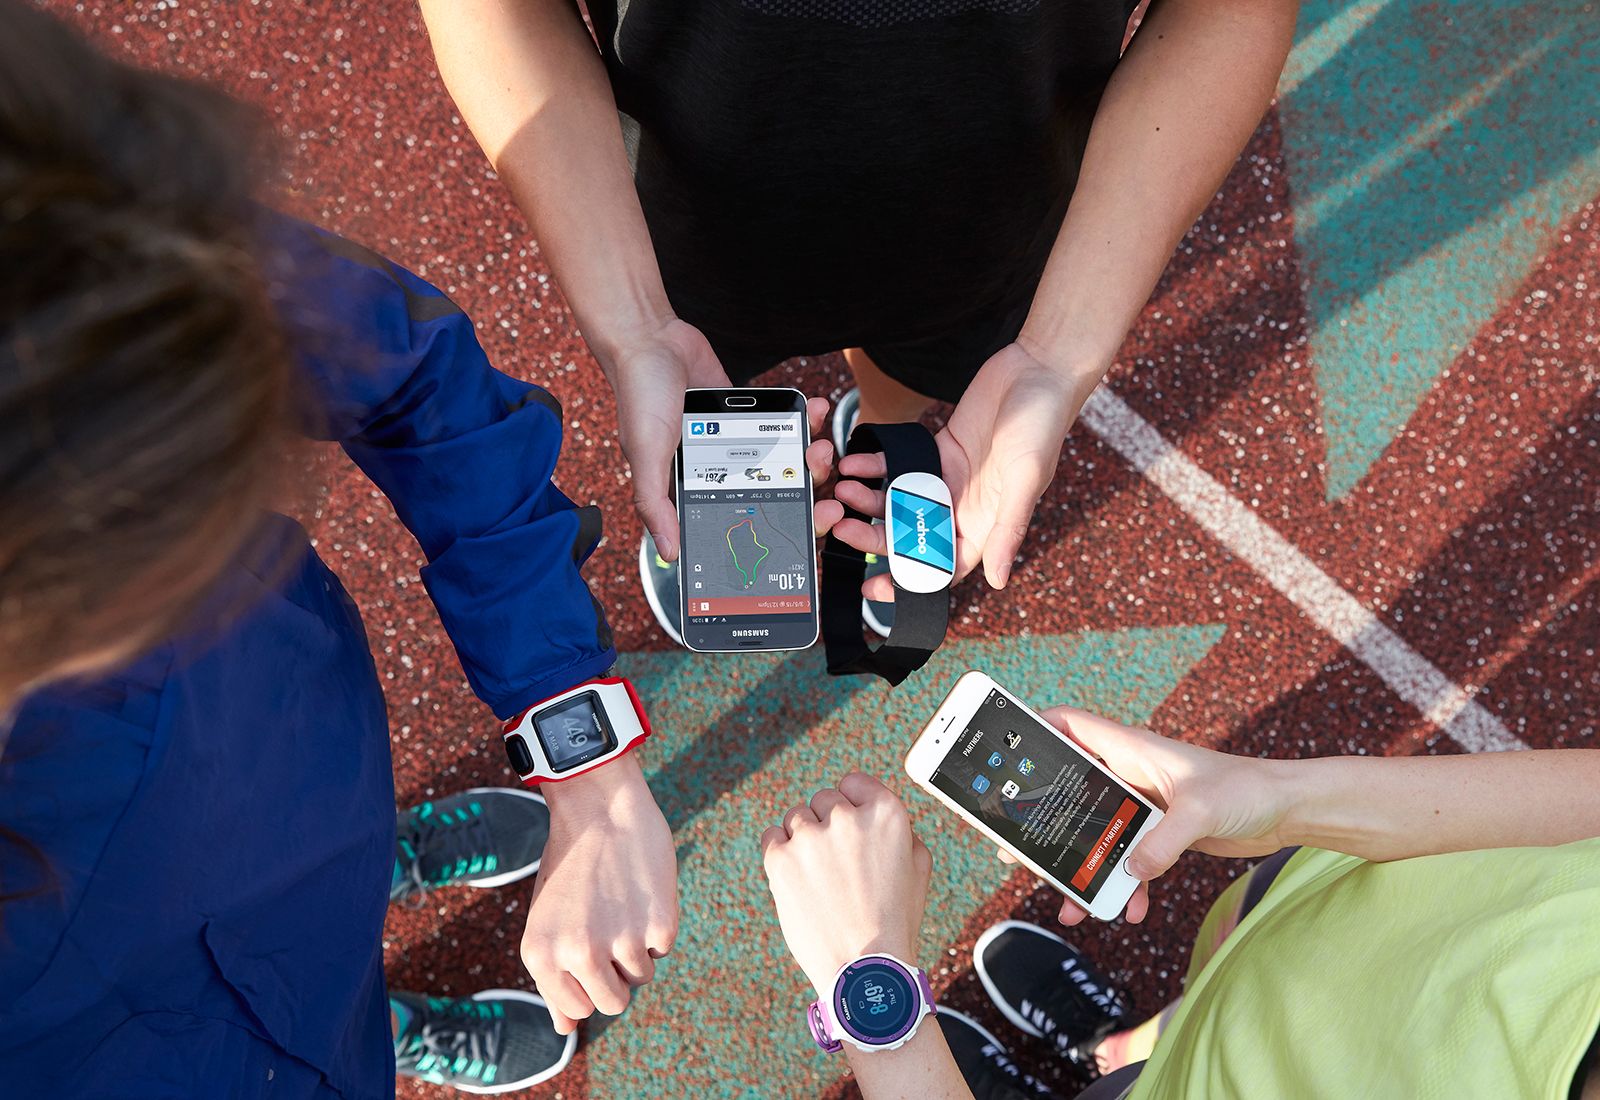 nike running app now plays nice with sports watches including garmin image 1